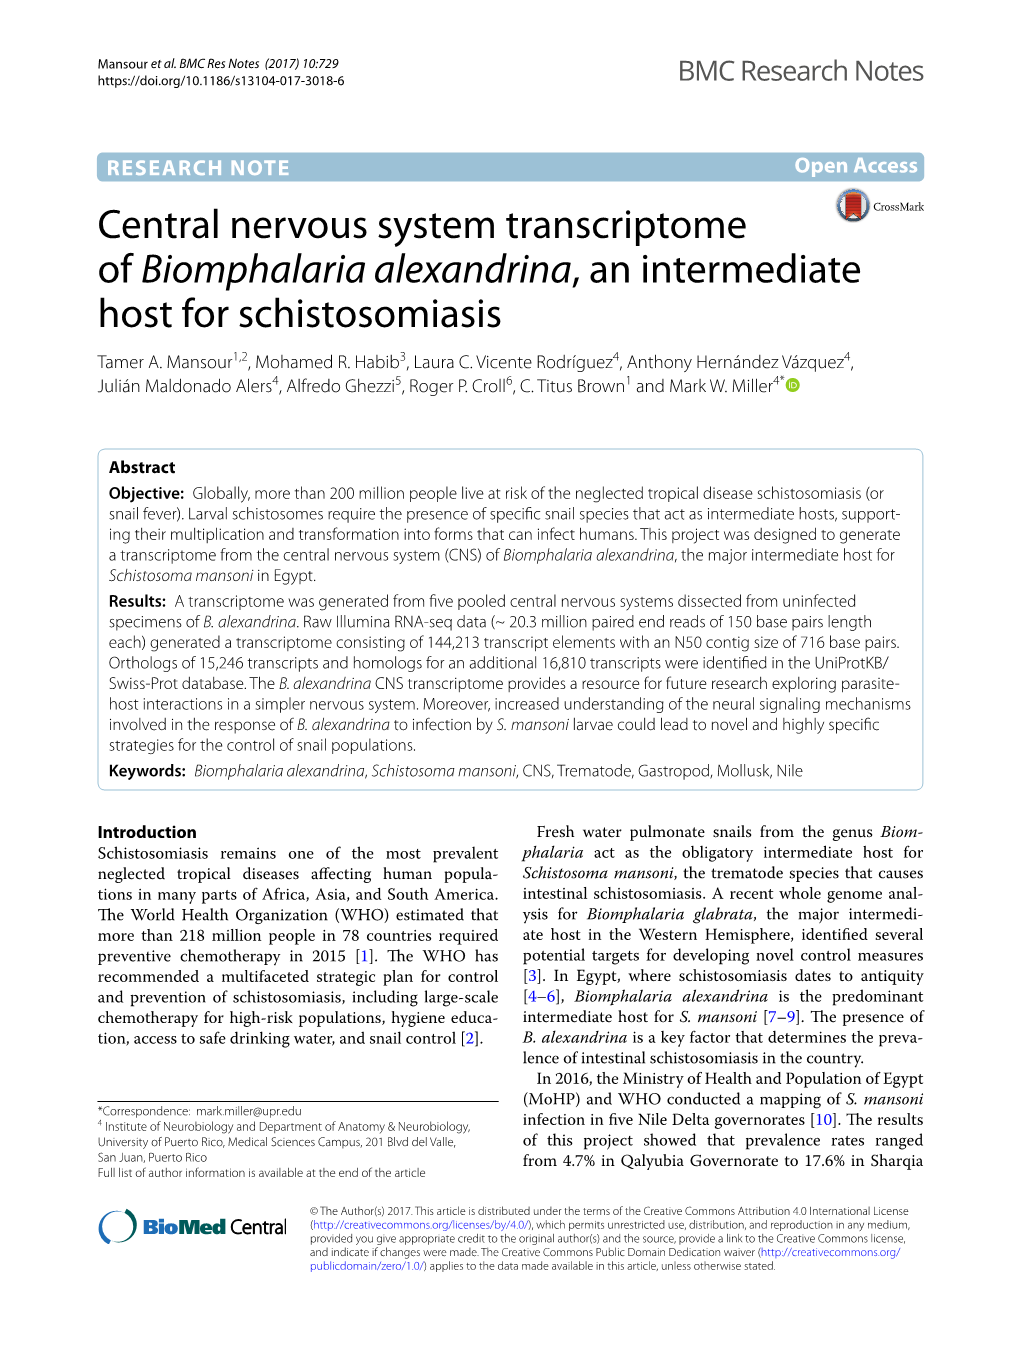 Central Nervous System Transcriptome of Biomphalaria Alexandrina, an Intermediate Host for Schistosomiasis Tamer A